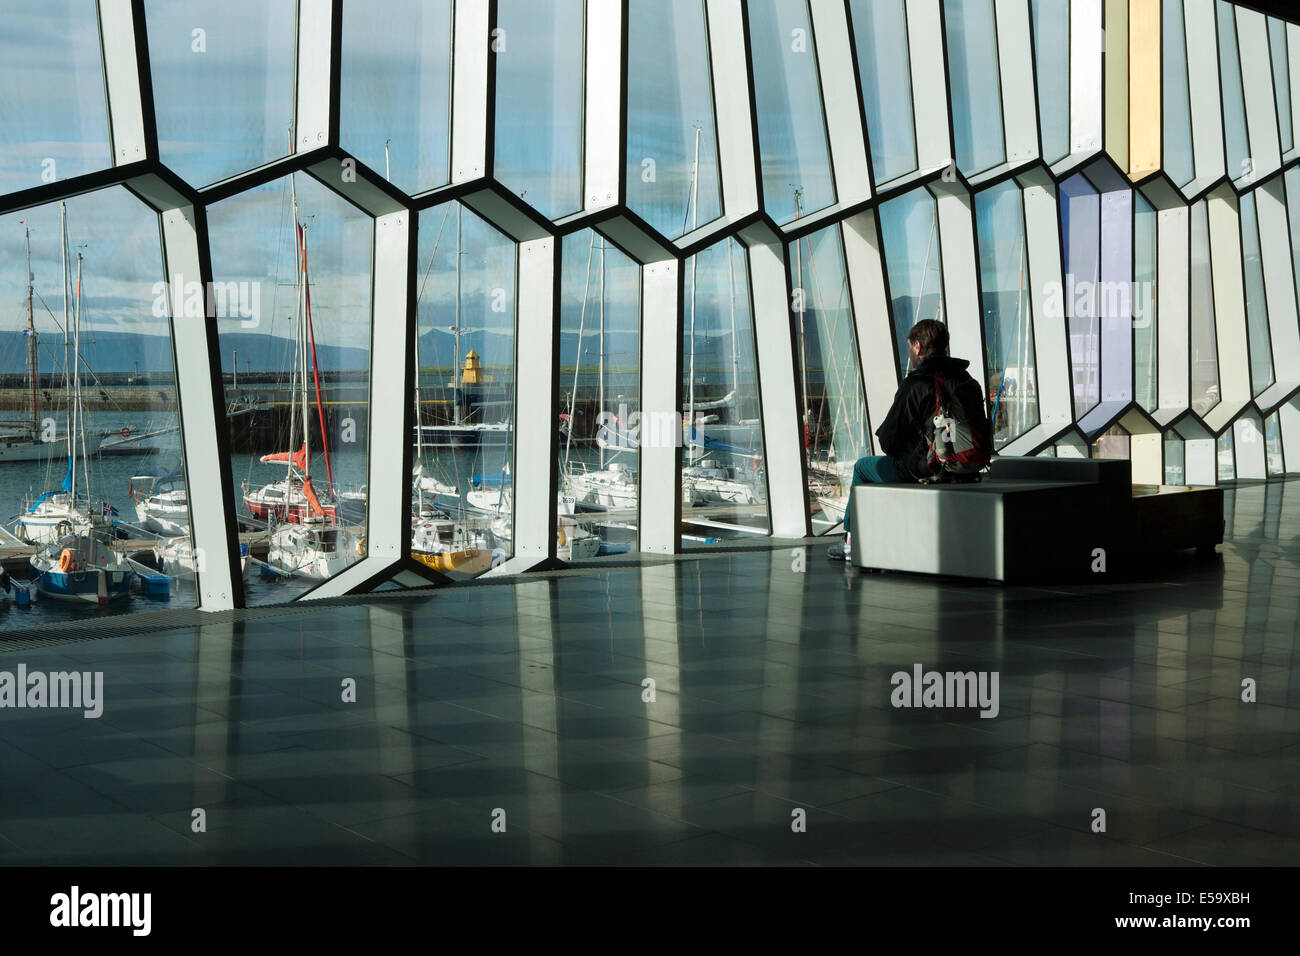 Harpa Concert Hall and Conference Centre - Reykjavik, Iceland Stock Photo